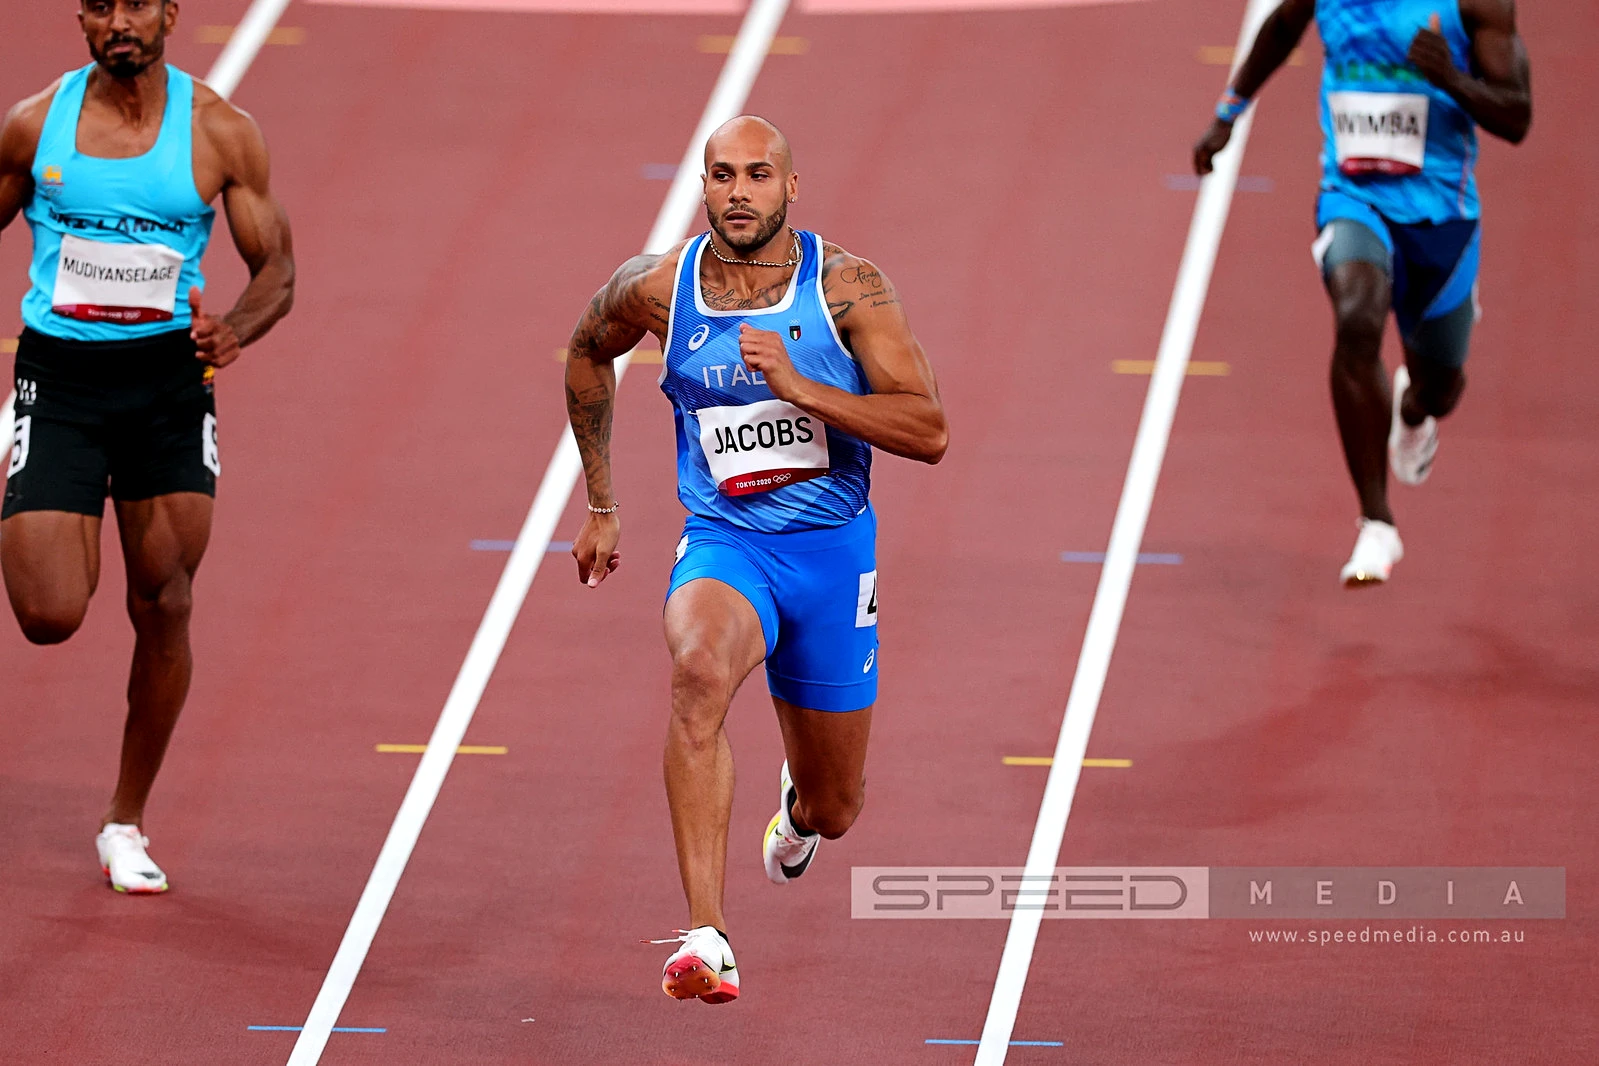 Lamont Marcell Jacobs pulls out of Stockholm Diamond League 100m